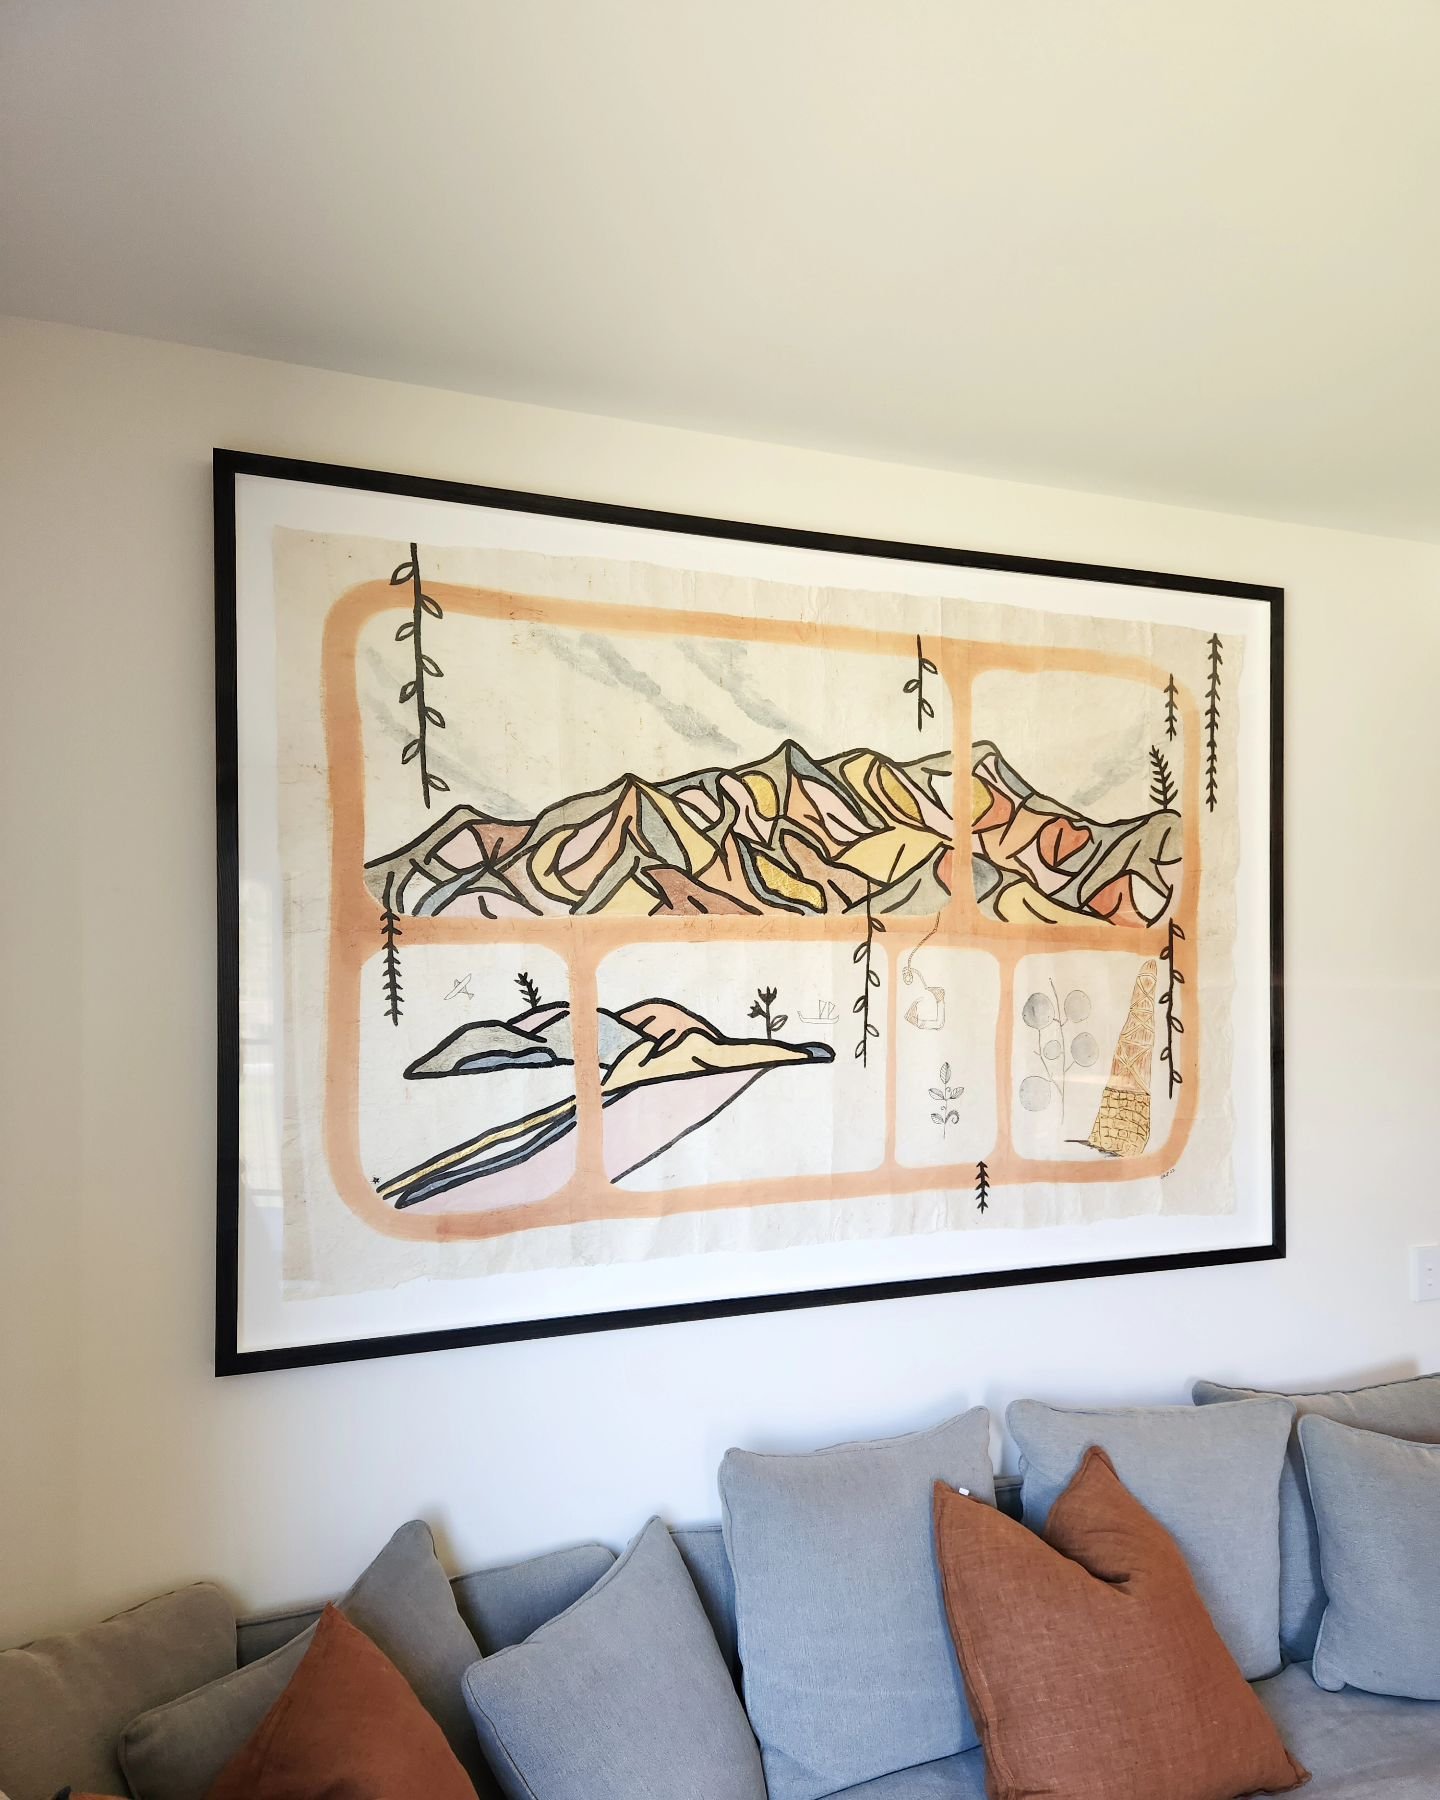 Another big piece by @_coraallan_ delivered and installed. We've been sitting on this one for a while, and schedules finally aligned to be able to get this on the clients wall. 

Custom-stained ash frame, surface-mounted and acrylic glazing. I only h